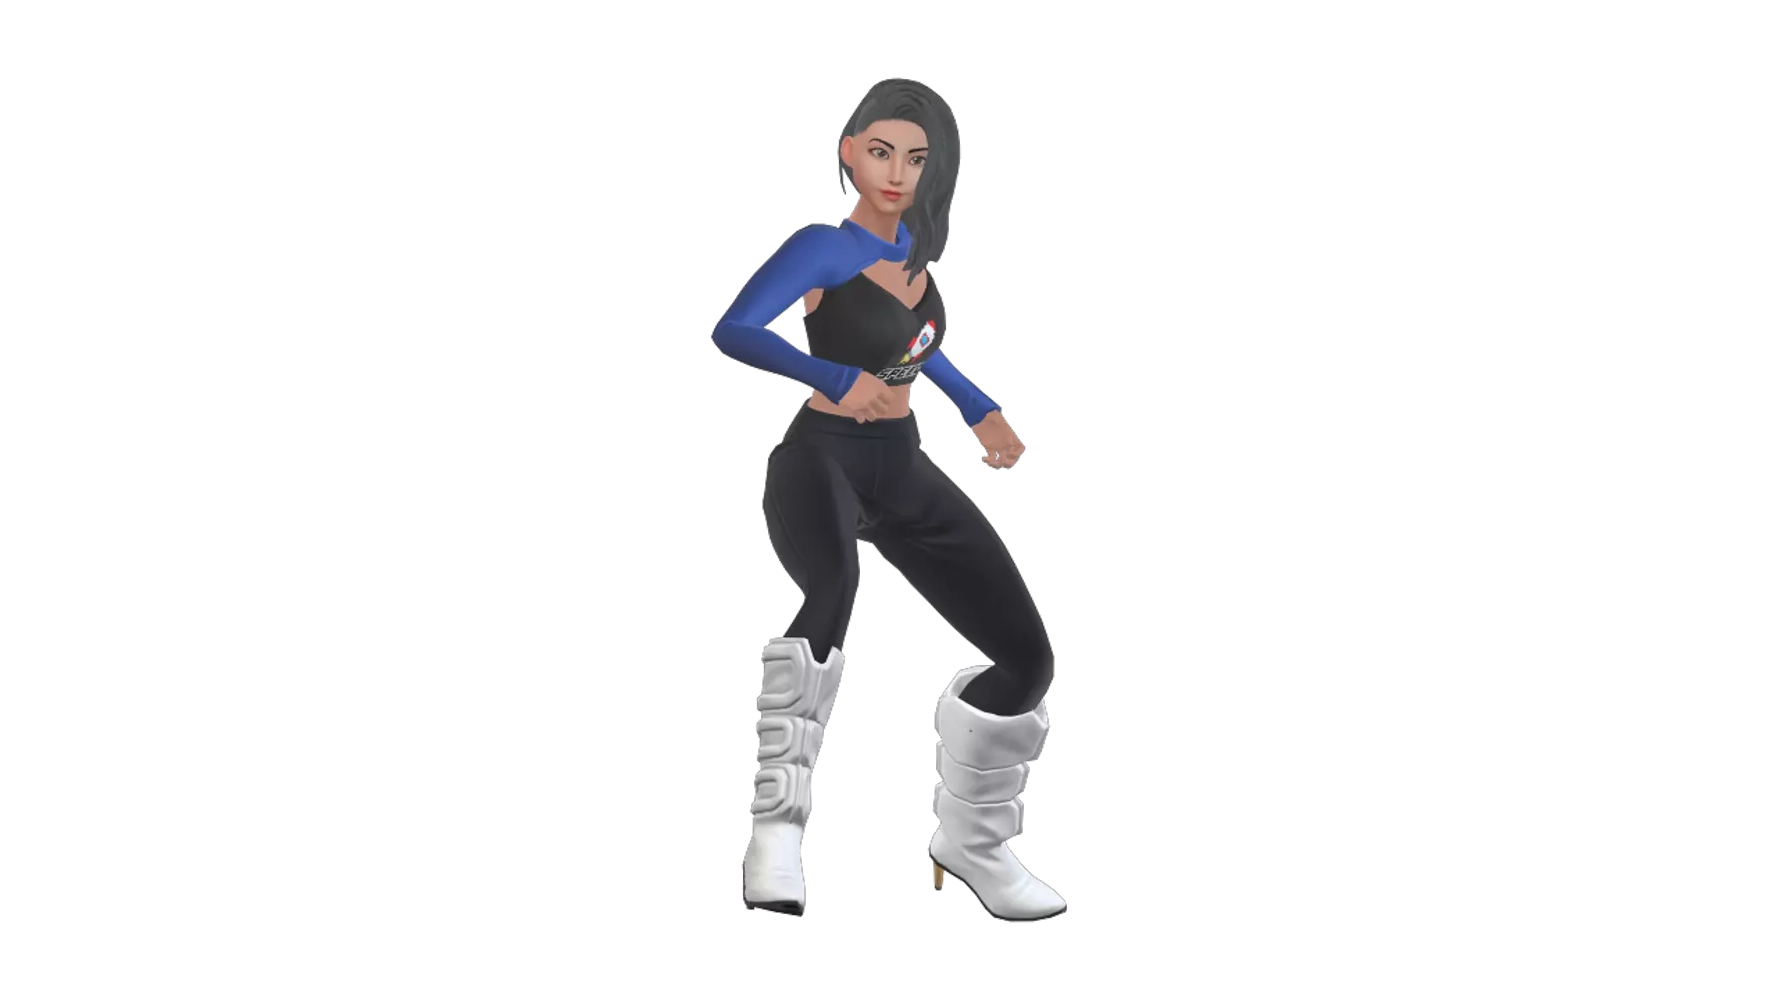 Woman Fight Stance 3D Graphic